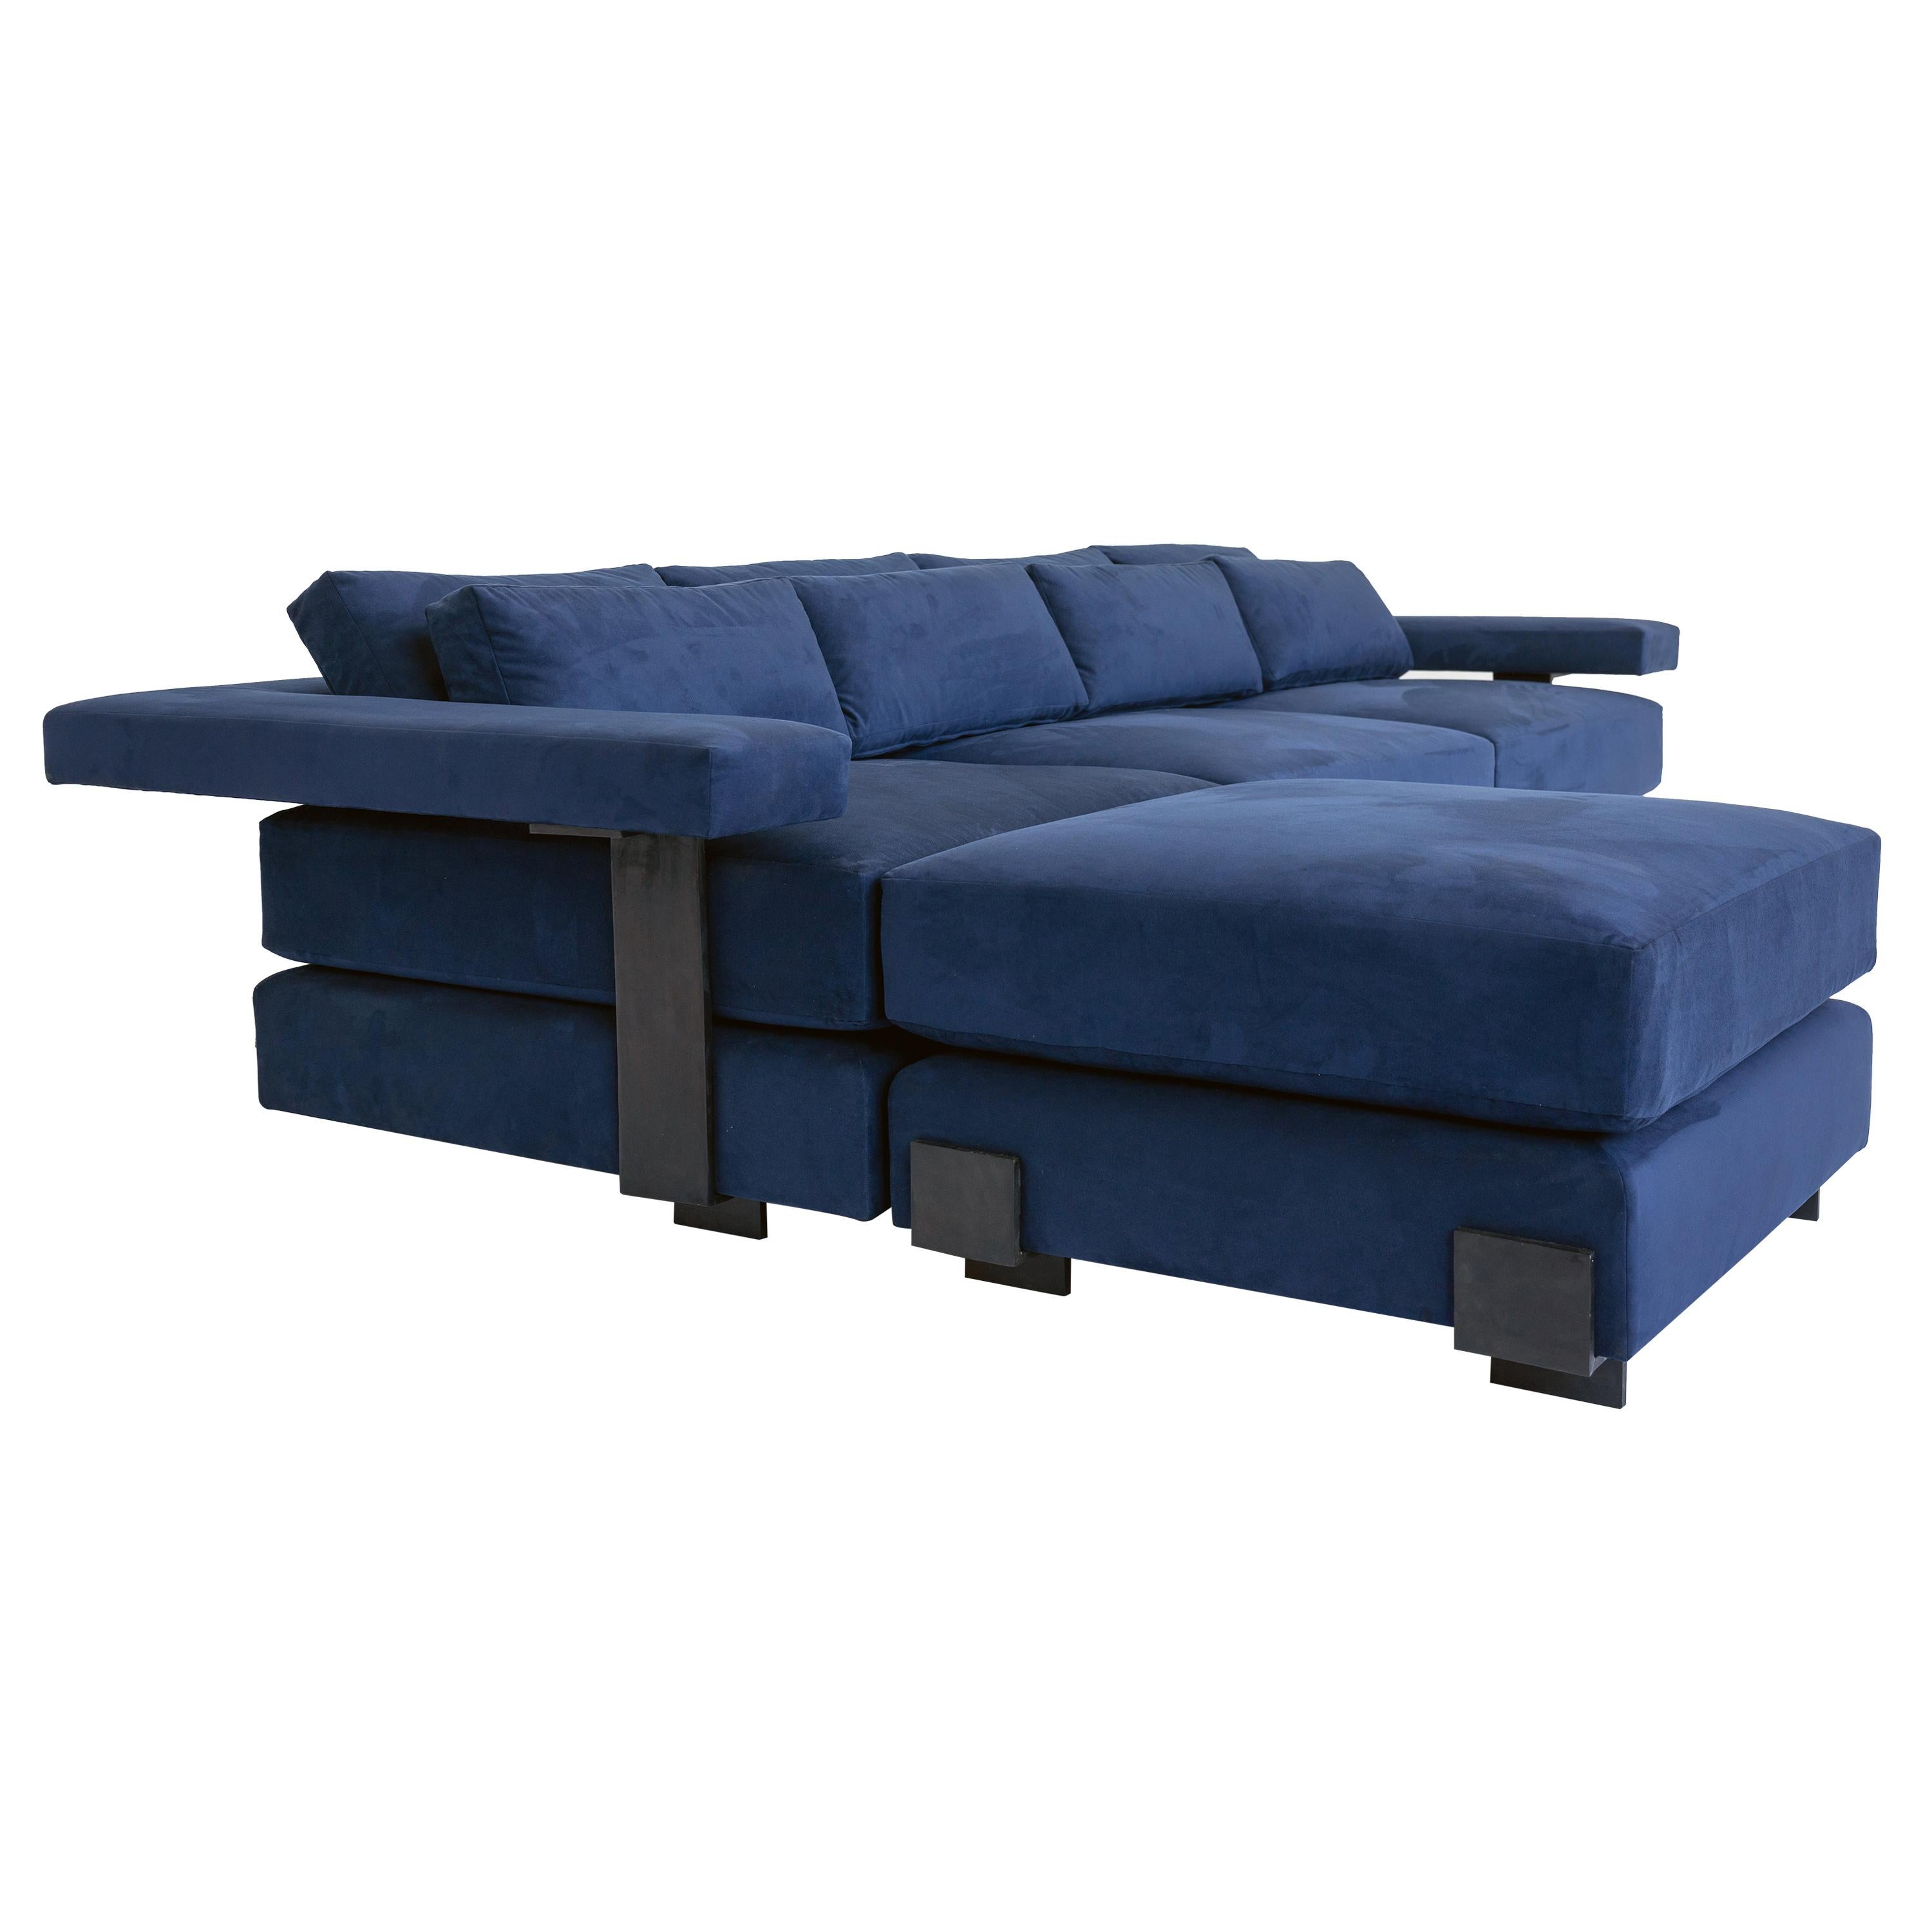 Sectional Sofa & Ottoman Contemporary Down Filling with Handcarved Steel Details For Sale